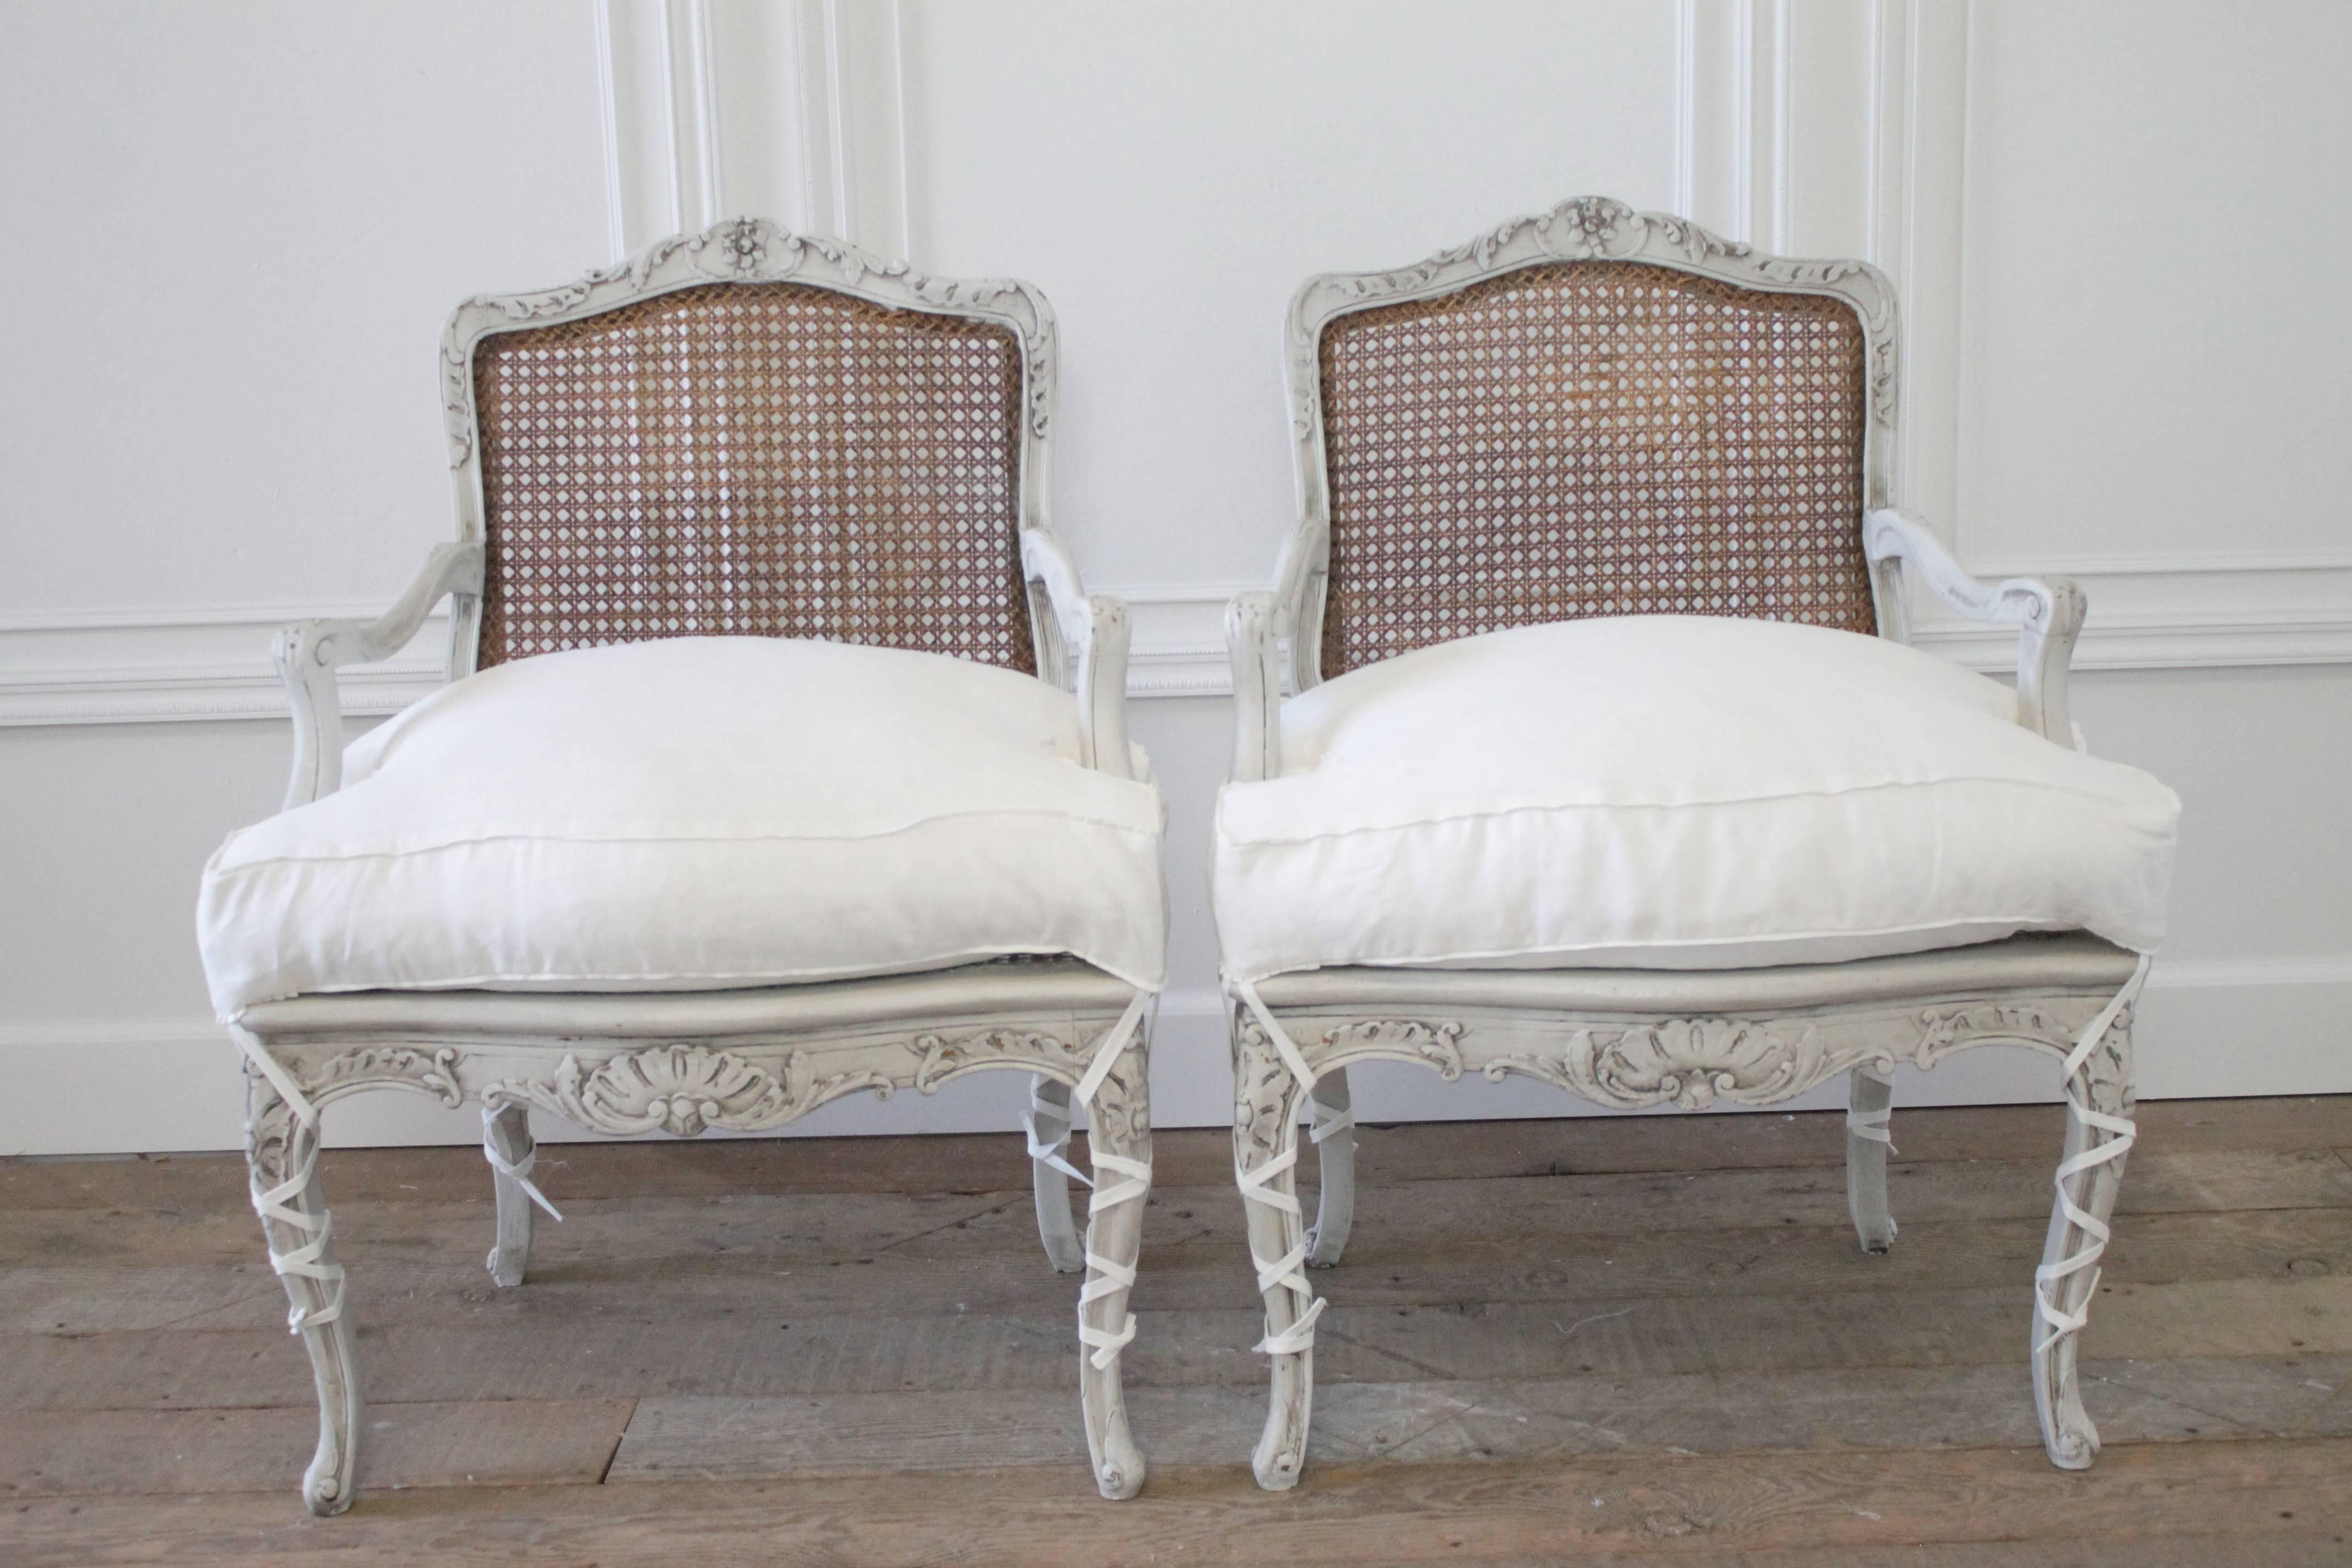 Painted in our oyster white, with the original natural cane, and an antique glazed patina. These carved armchairs have a carved flower with trailing scrolling leaf designs. The cane was left original, and the one of the chairs has been repaired, the